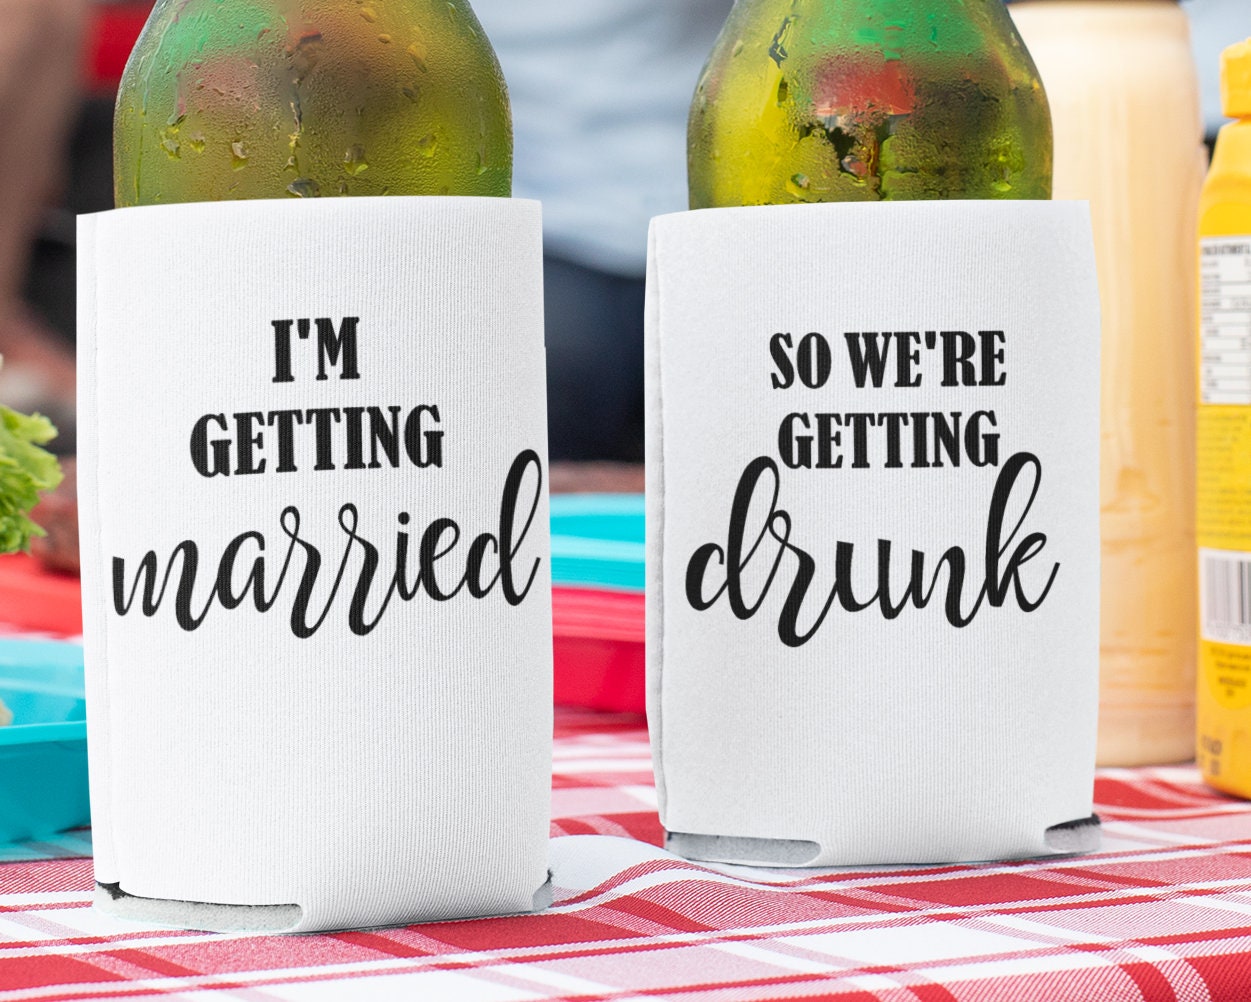 I'm getting married So we're getting drunk Drink | Etsy